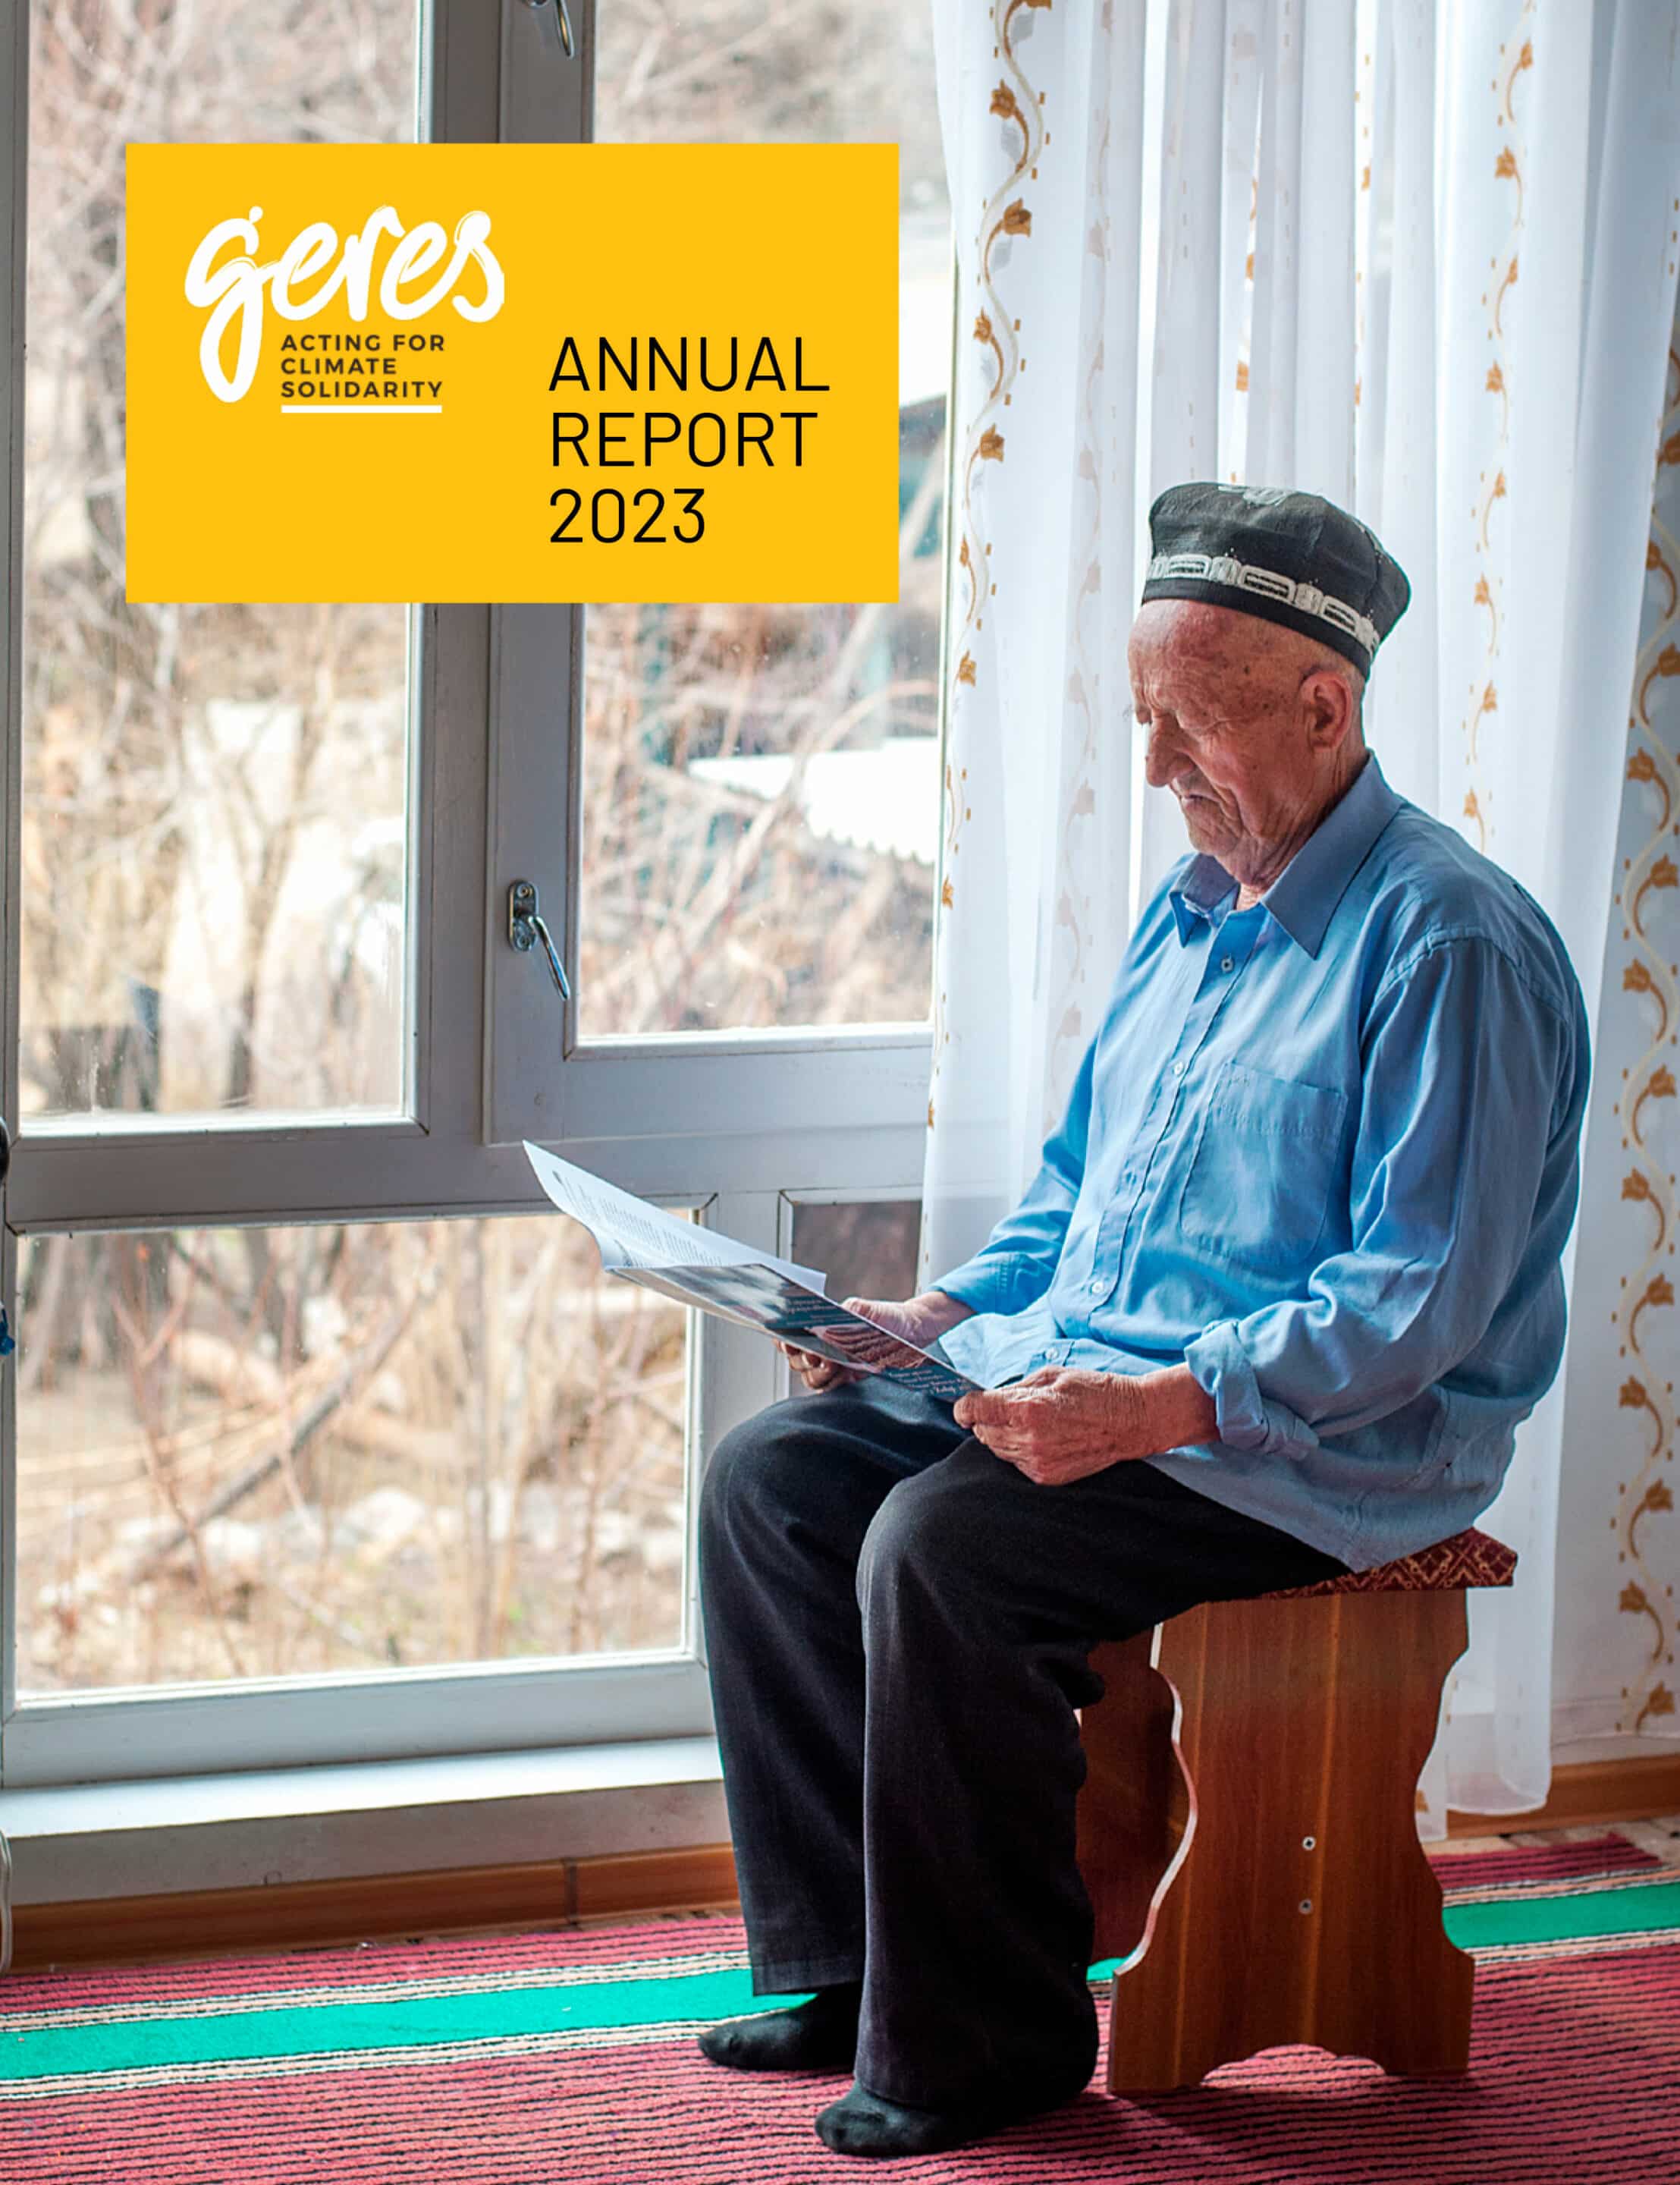 Annual report 2021 Geres